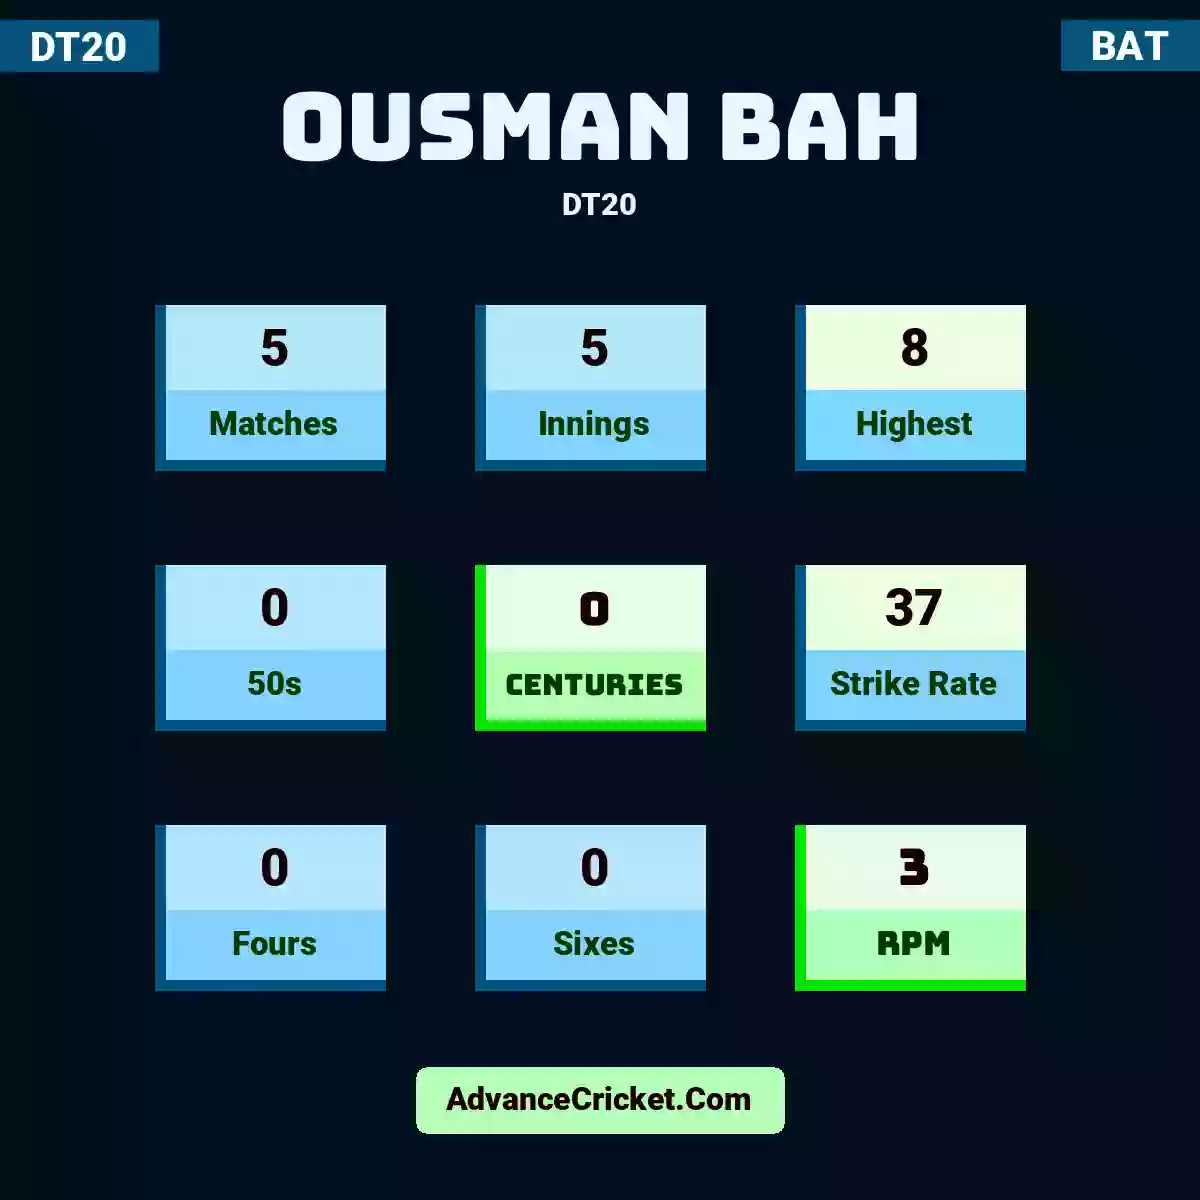 Ousman Bah DT20 , Ousman Bah played 5 matches, scored 8 runs as highest, 0 half-centuries, and 0 centuries, with a strike rate of 37. O.Bah hit 0 fours and 0 sixes, with an RPM of 3.